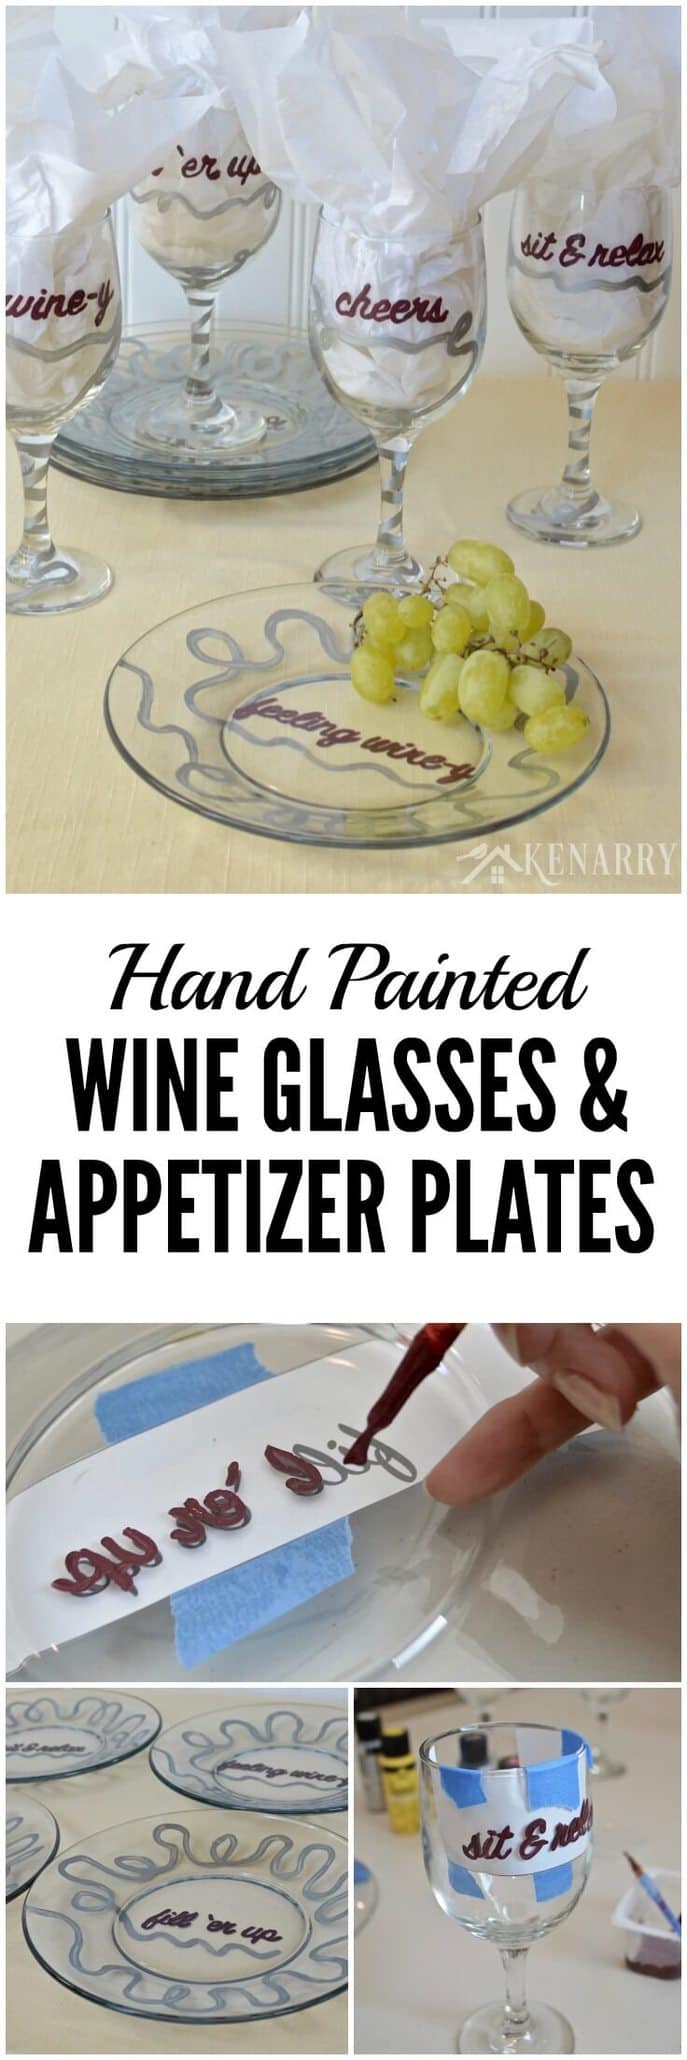 Love these DIY hand painted wine glasses and appetizer plates! They'd be a fun and easy gift idea or to use for your own parties.